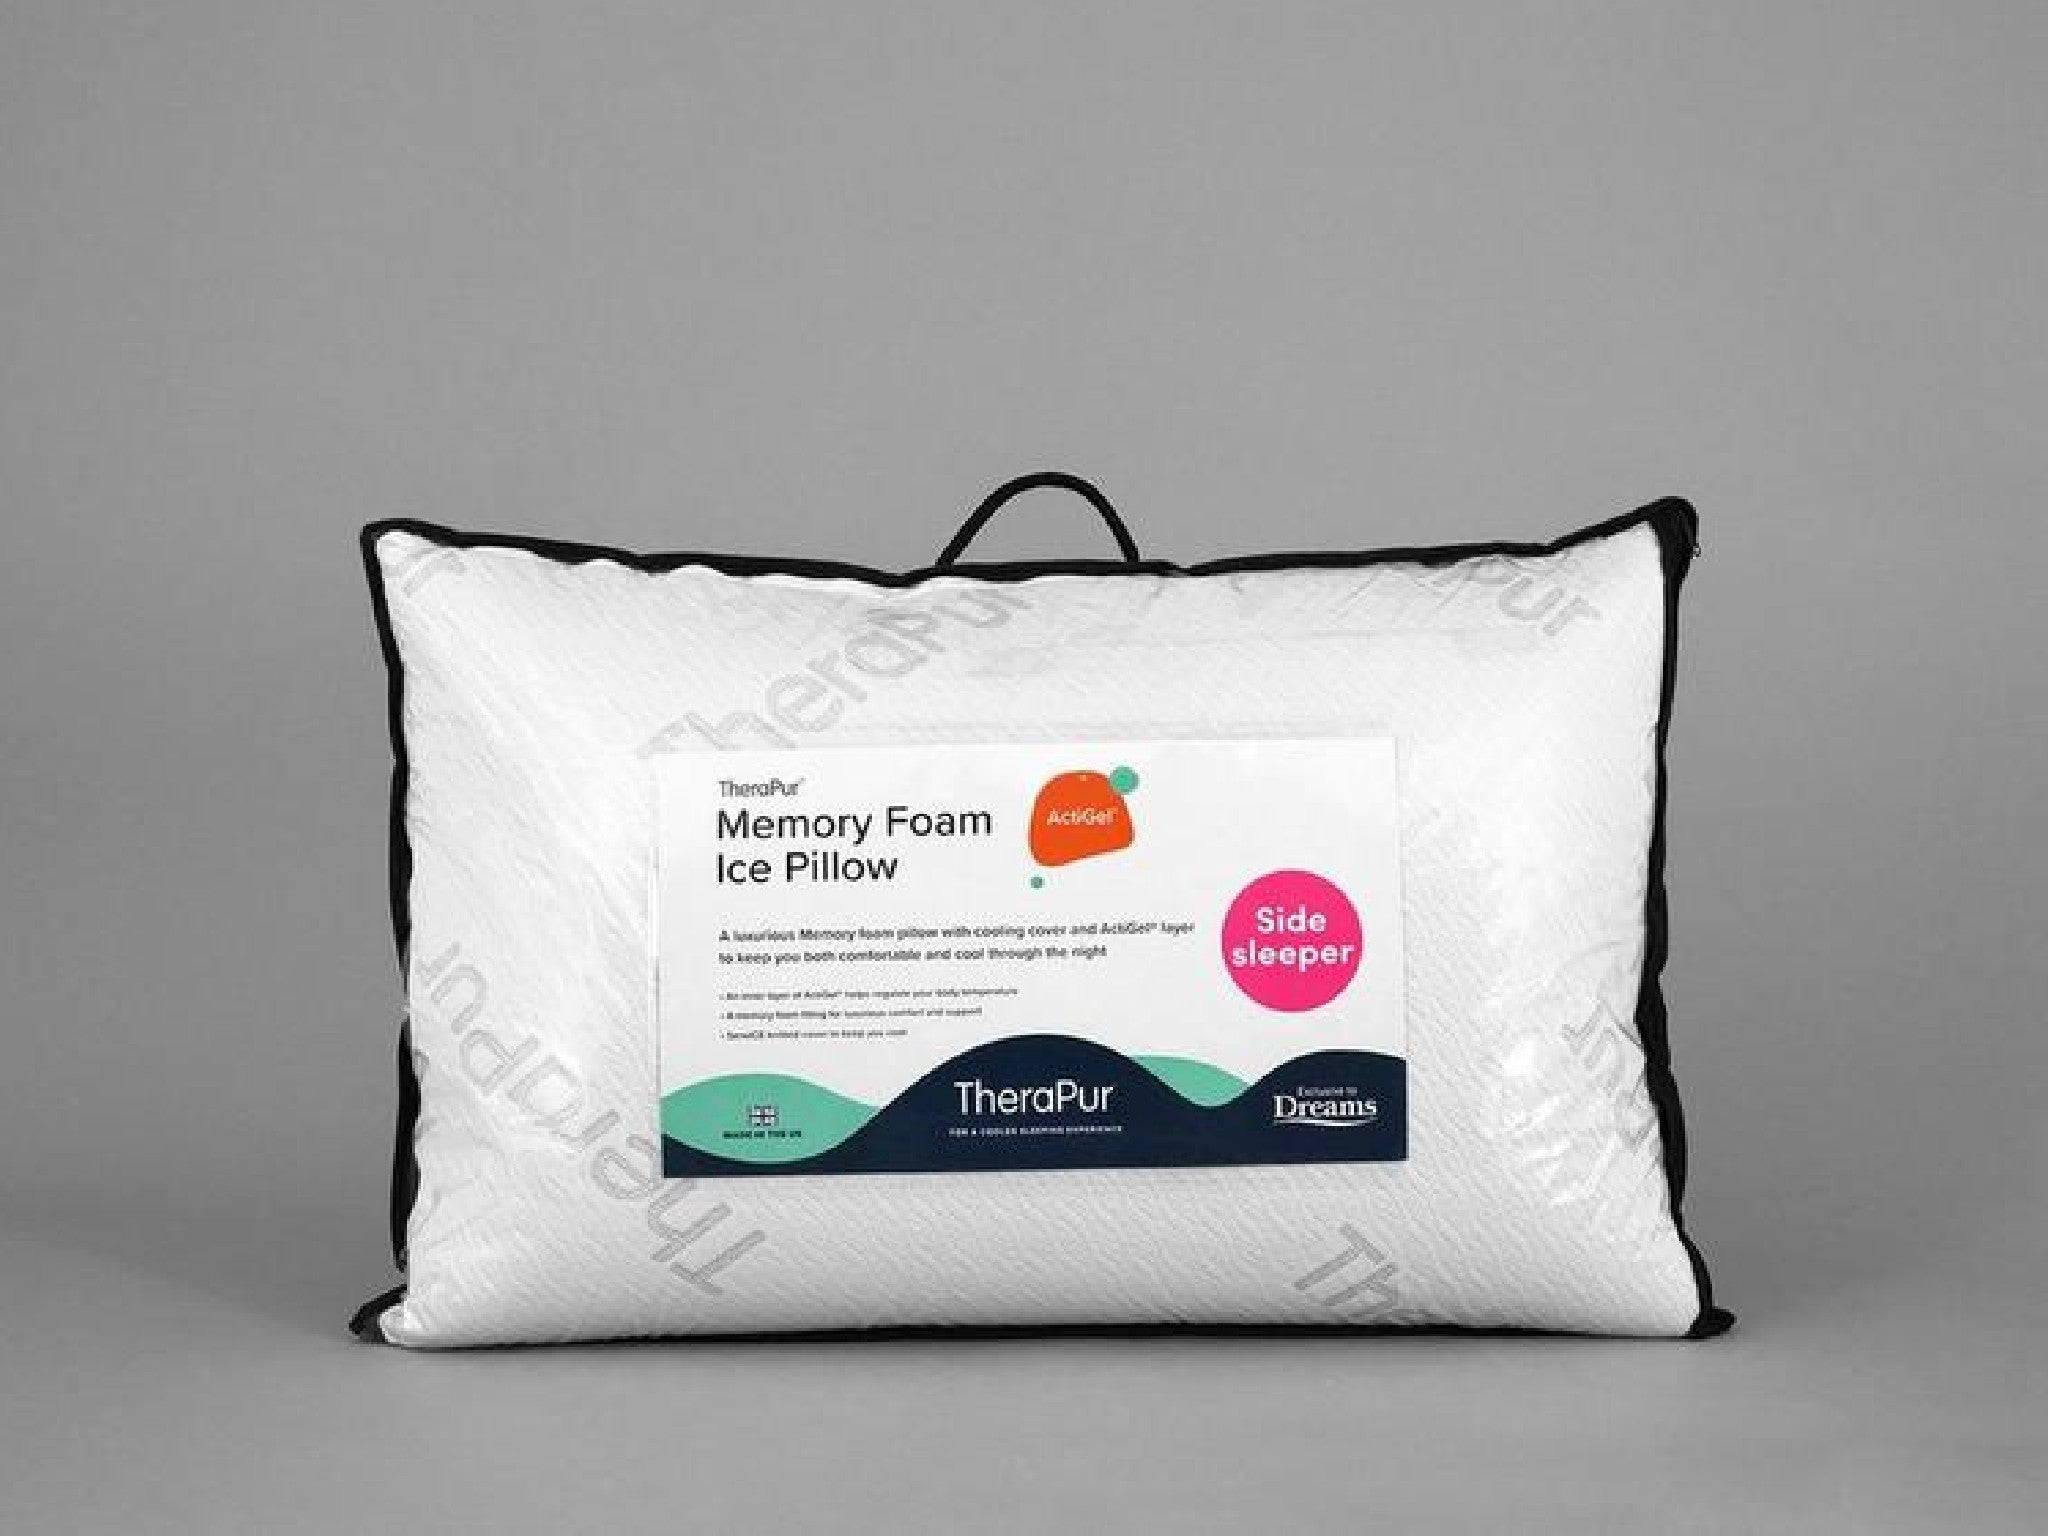 Dreams therapur memory foam ice pillow indybest